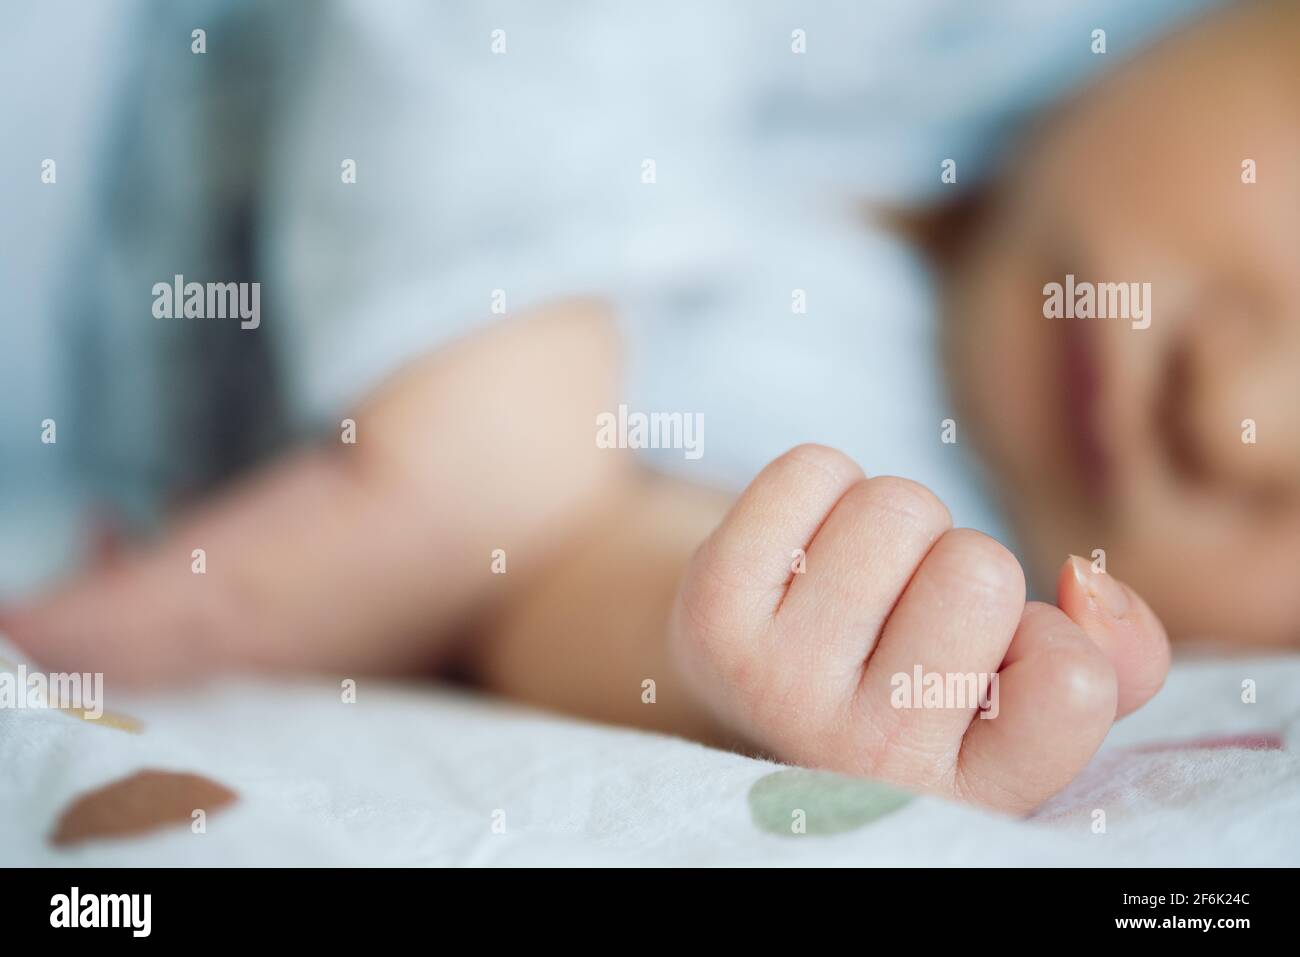 close-up view of hand of newborn baby resting on bed Stock Photo